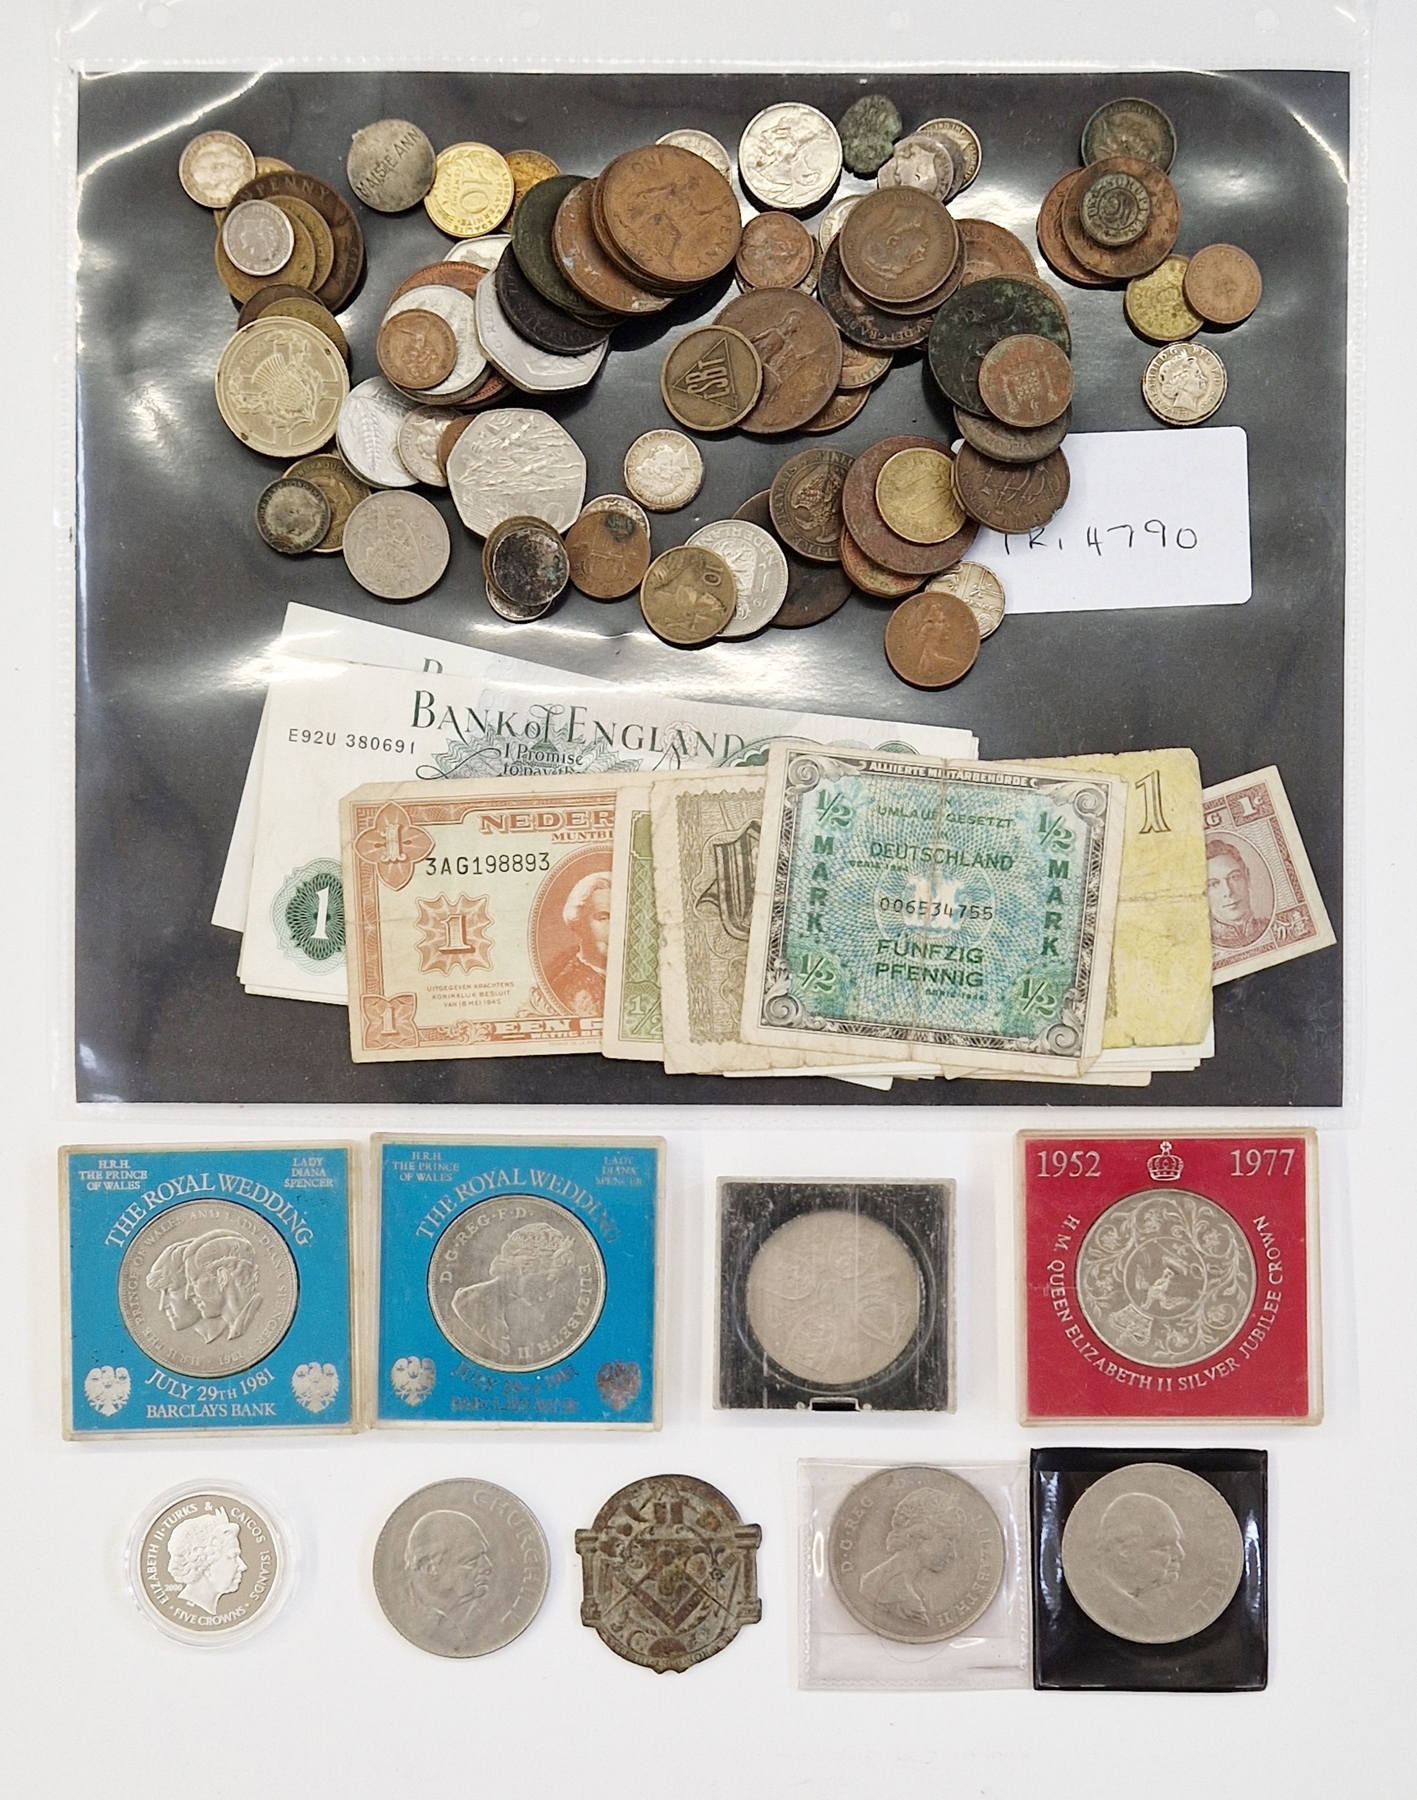 Small quantity of banknotes and various coins (1 folder and 1 bag)